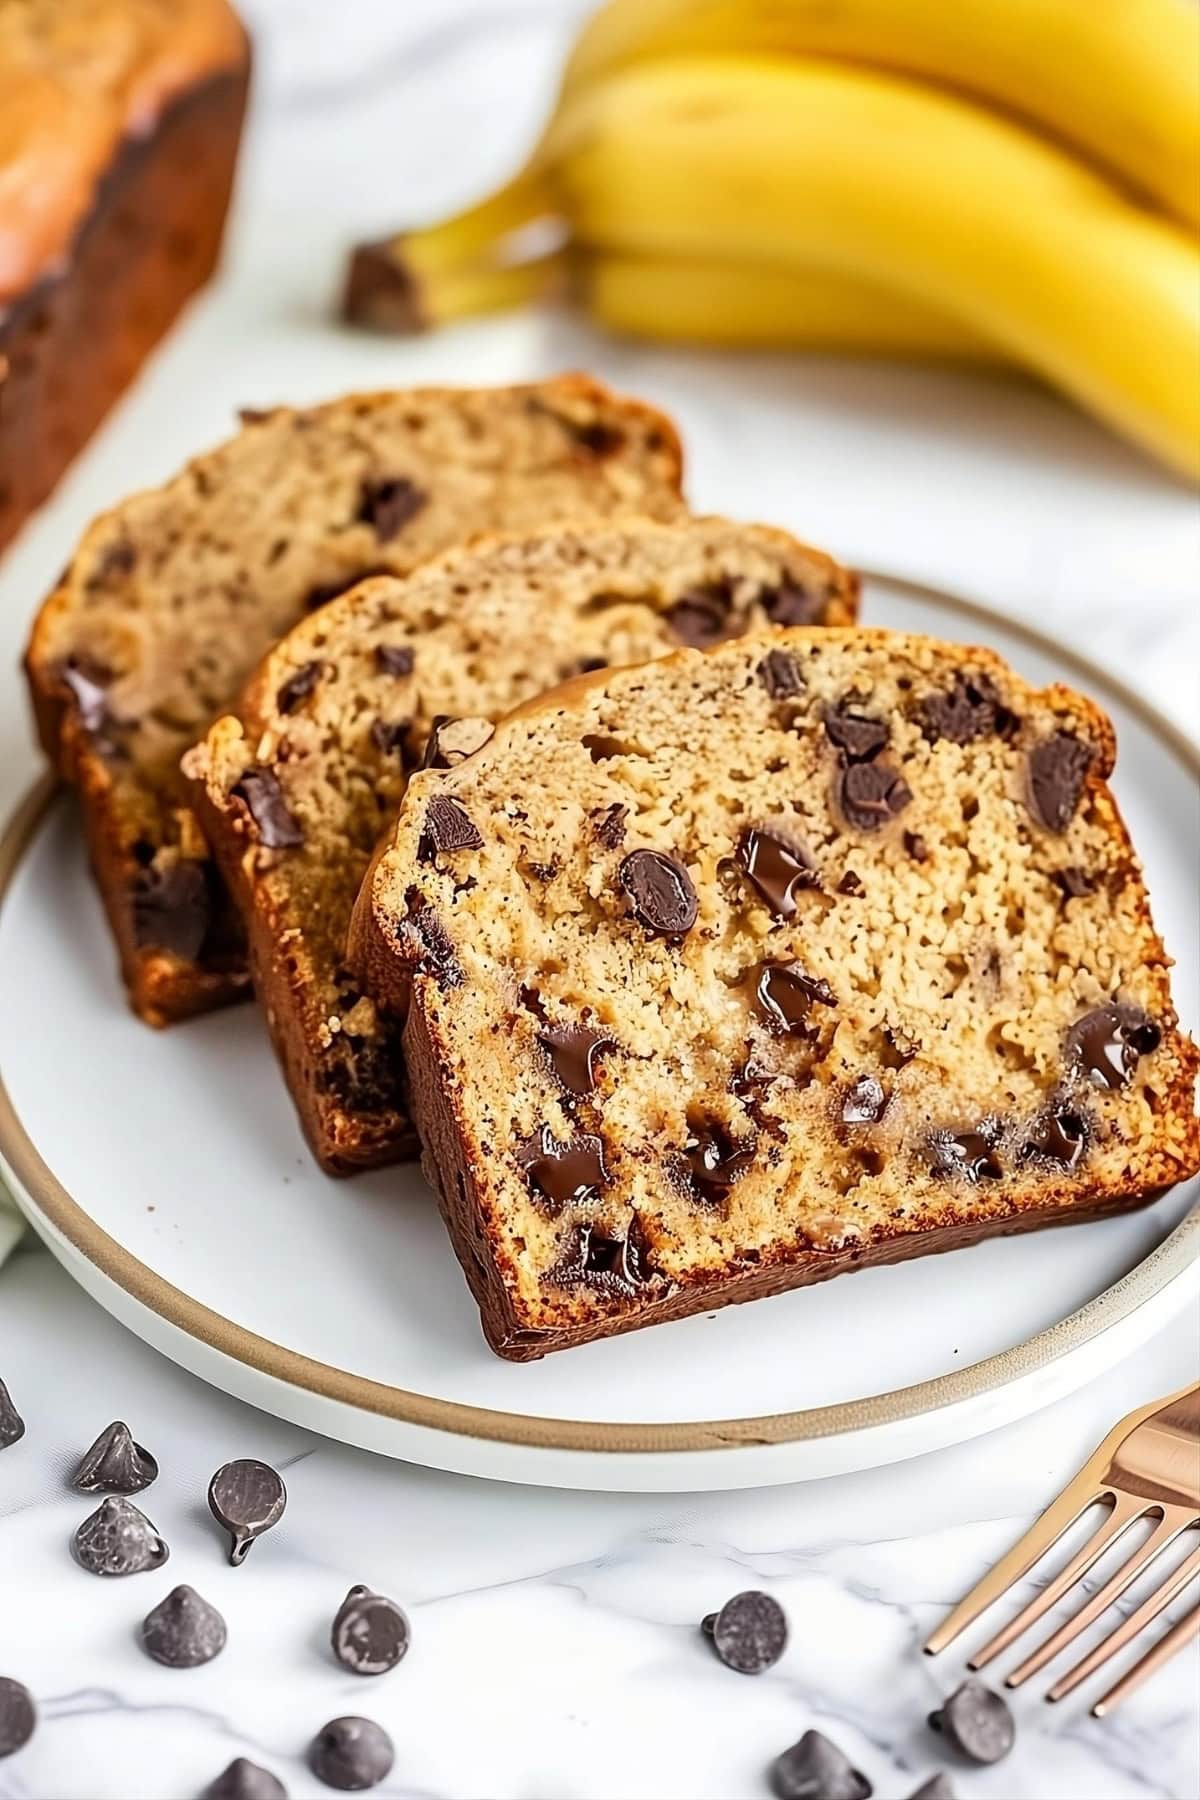 Slices of banana peanut butter bread loaf served in a plate.